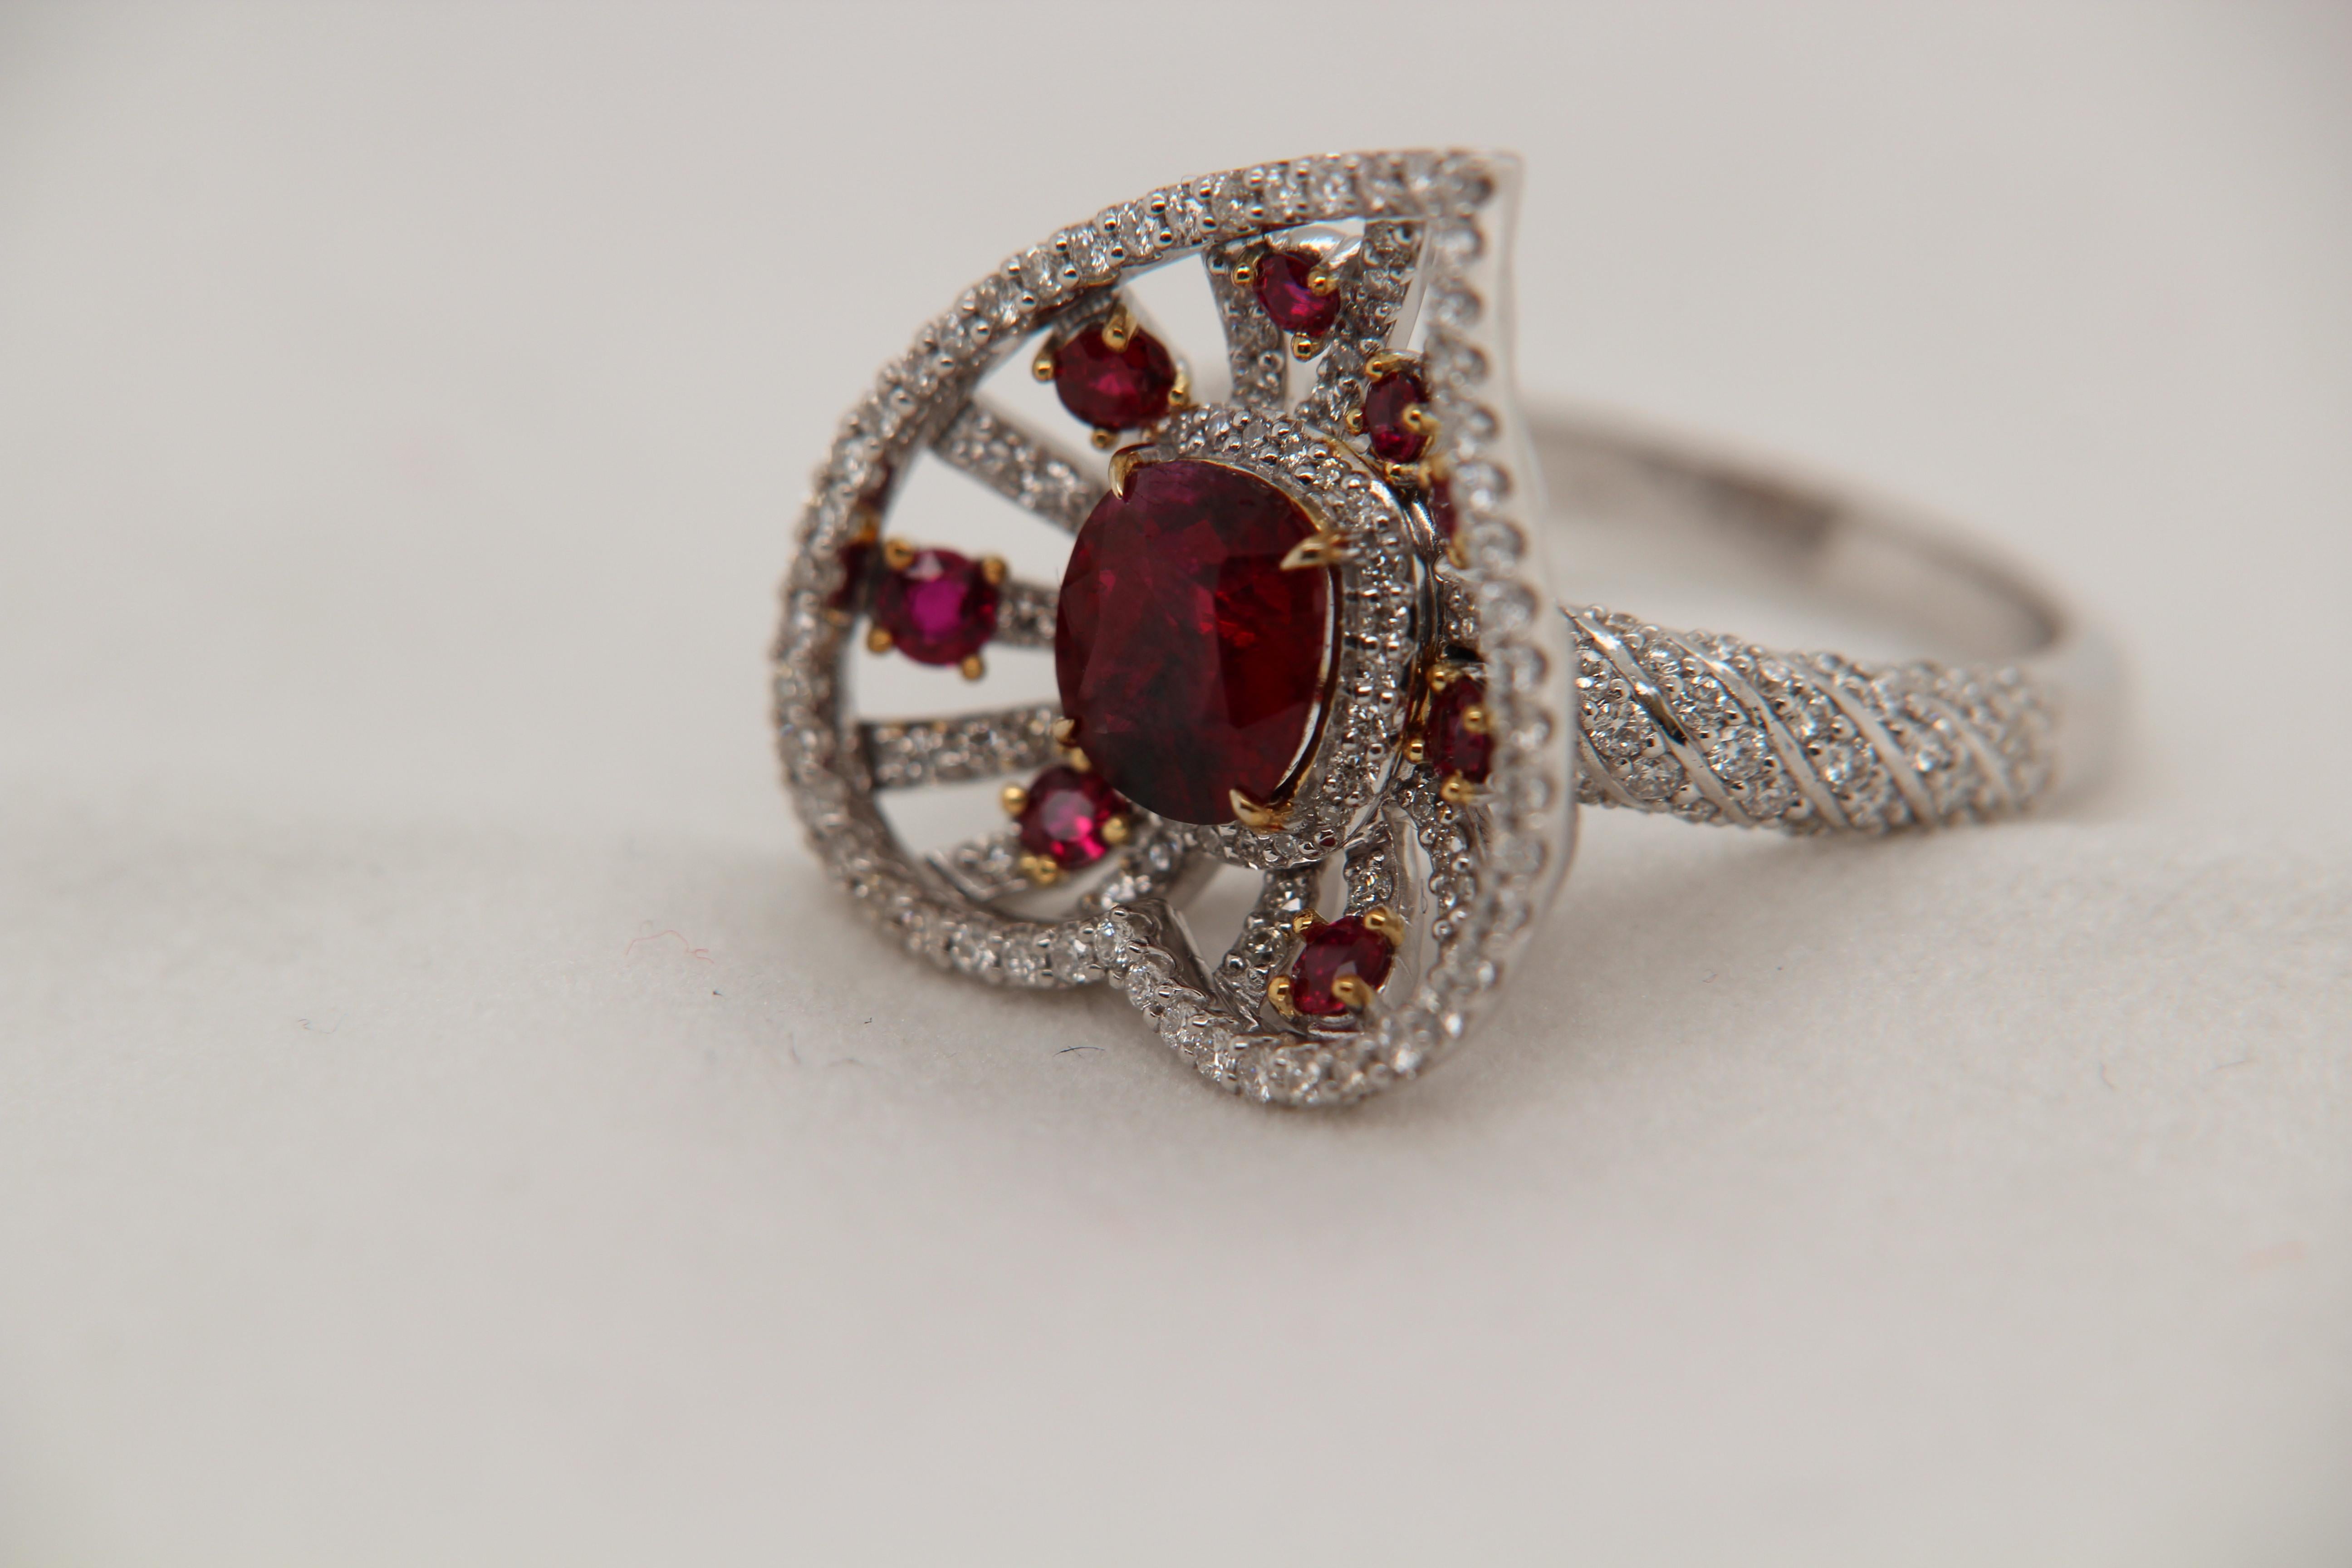 A brand new 1.70 carat Burmese ruby ring mounted with diamonds in 18 Karat gold. The center ruby weighs 1.70 carat and is certified by Gem Research Swisslab (GRS) as natural, no heat and Vivid Red Pigeon's Blood. The total ruby weighs 2.10 carat and